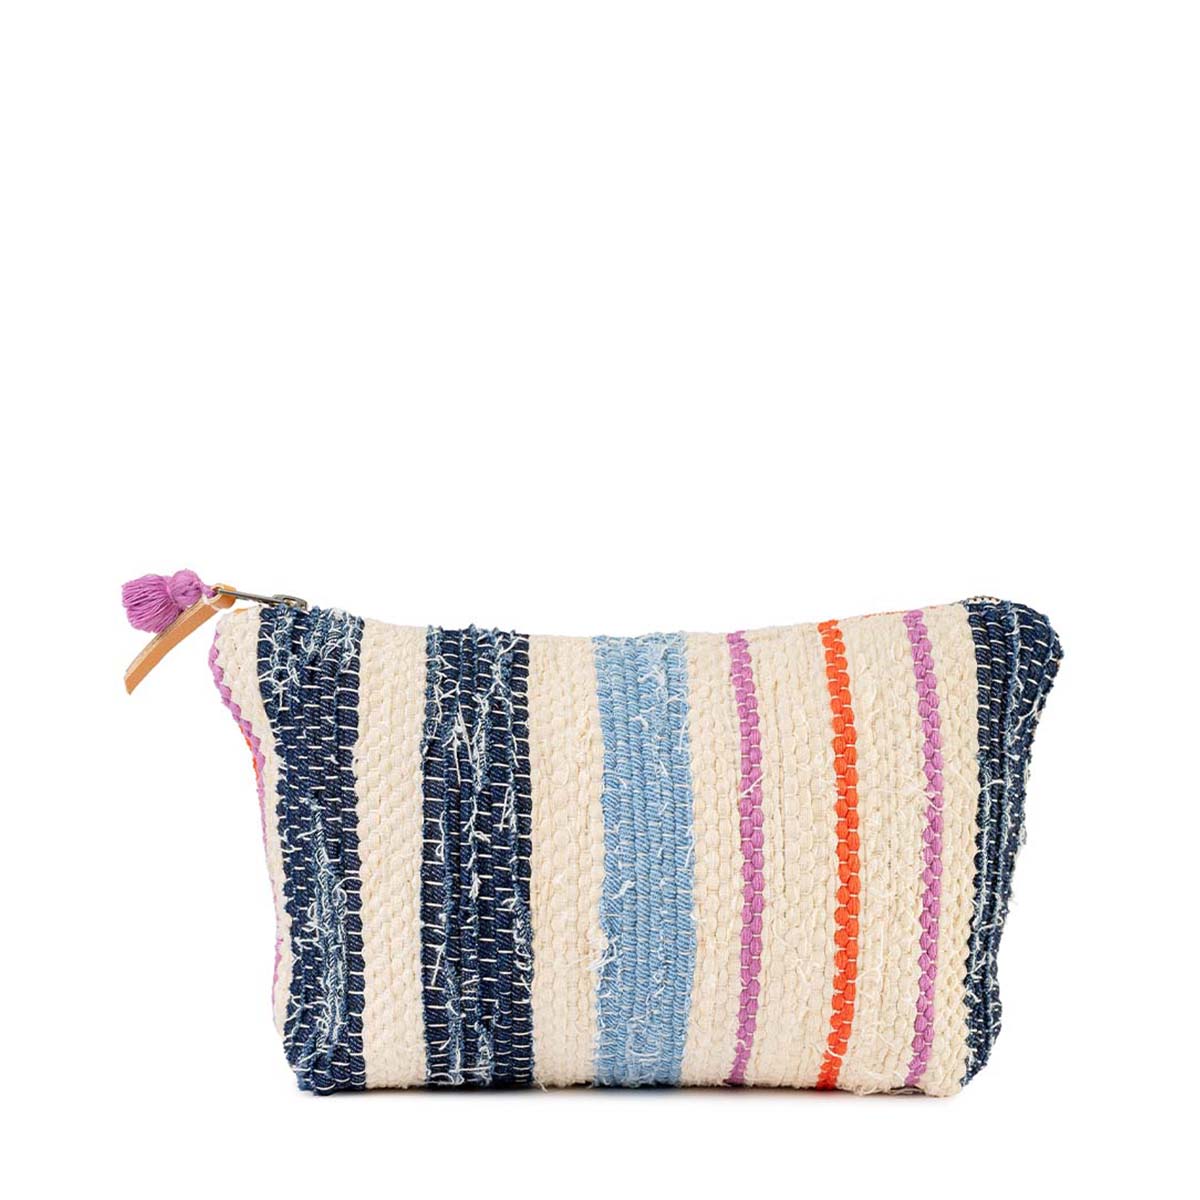 The front of the hand woven artisan Cristina Cosmetic Pouch in Spring Sherbert pattern. It has a sky blue, dark blue, pink, and orange vertical striped pattern. It has a magenta mini tassel and a leather zipper pull. 